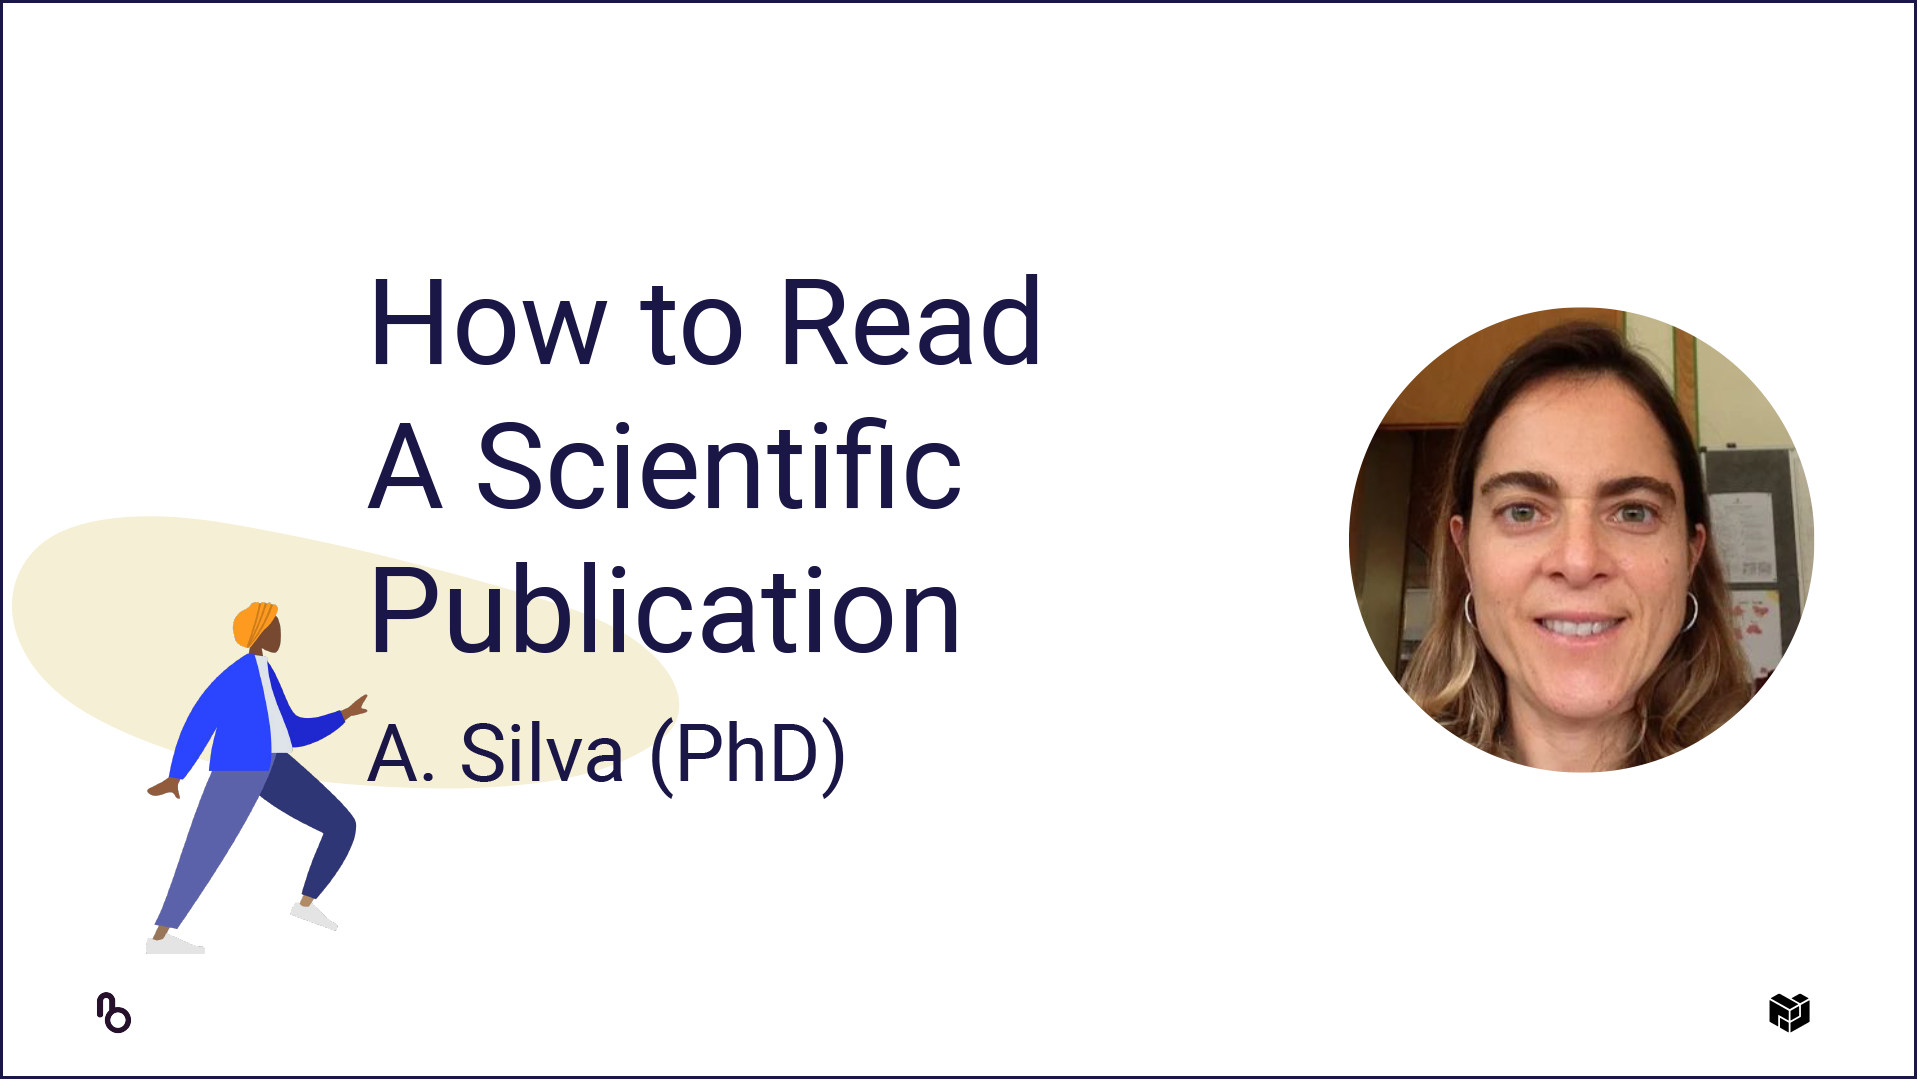 How to read a scientific publication video thumbnail